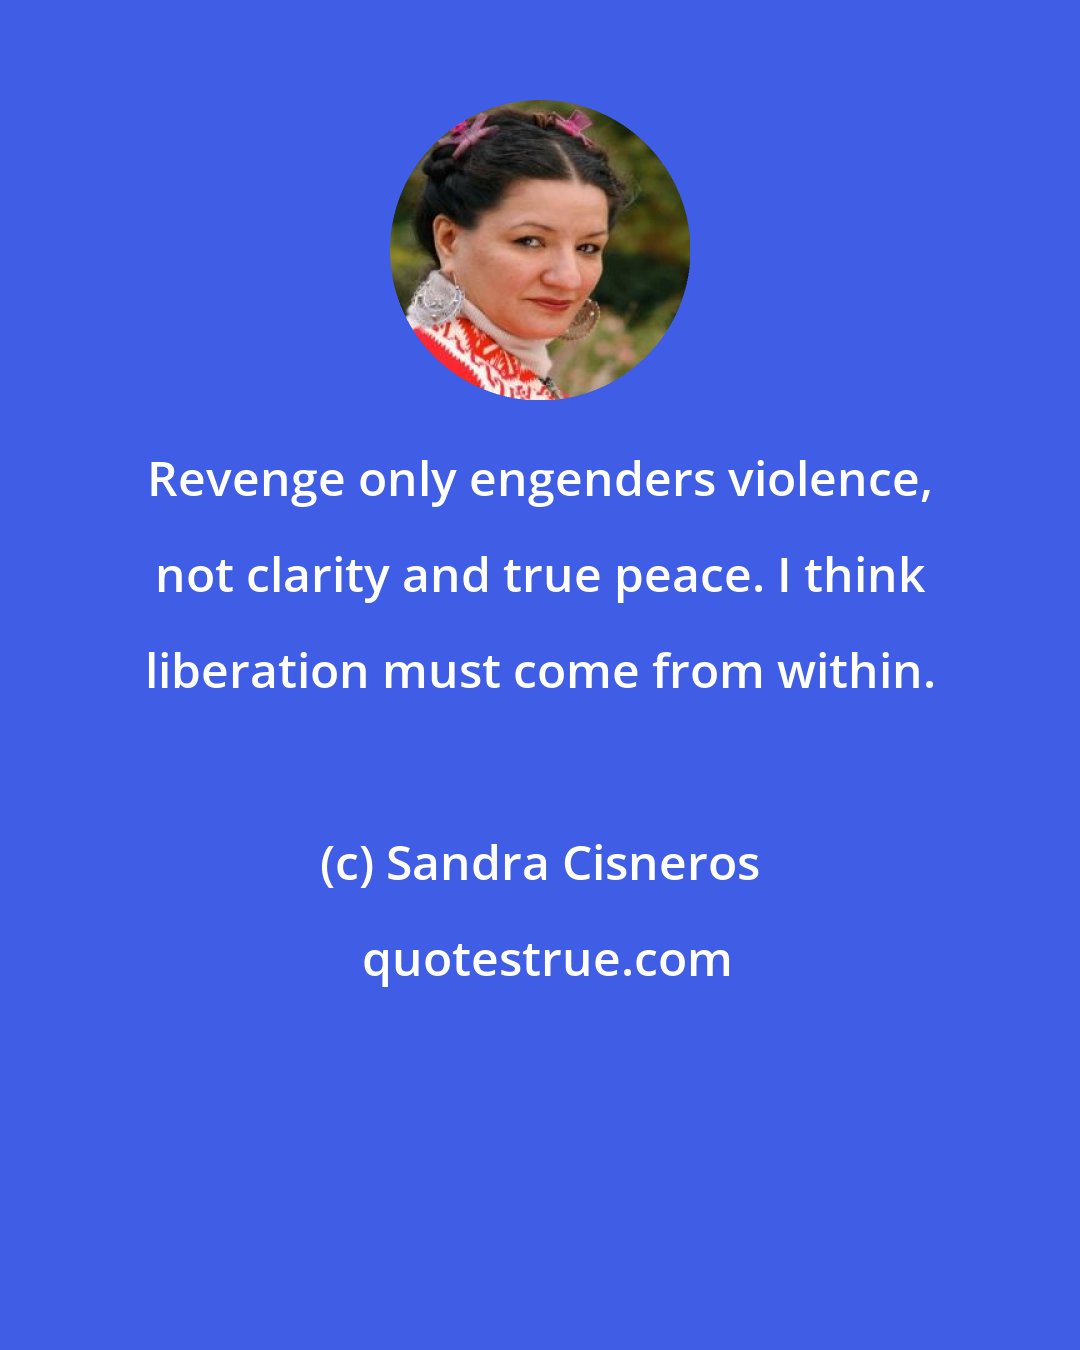 Sandra Cisneros: Revenge only engenders violence, not clarity and true peace. I think liberation must come from within.